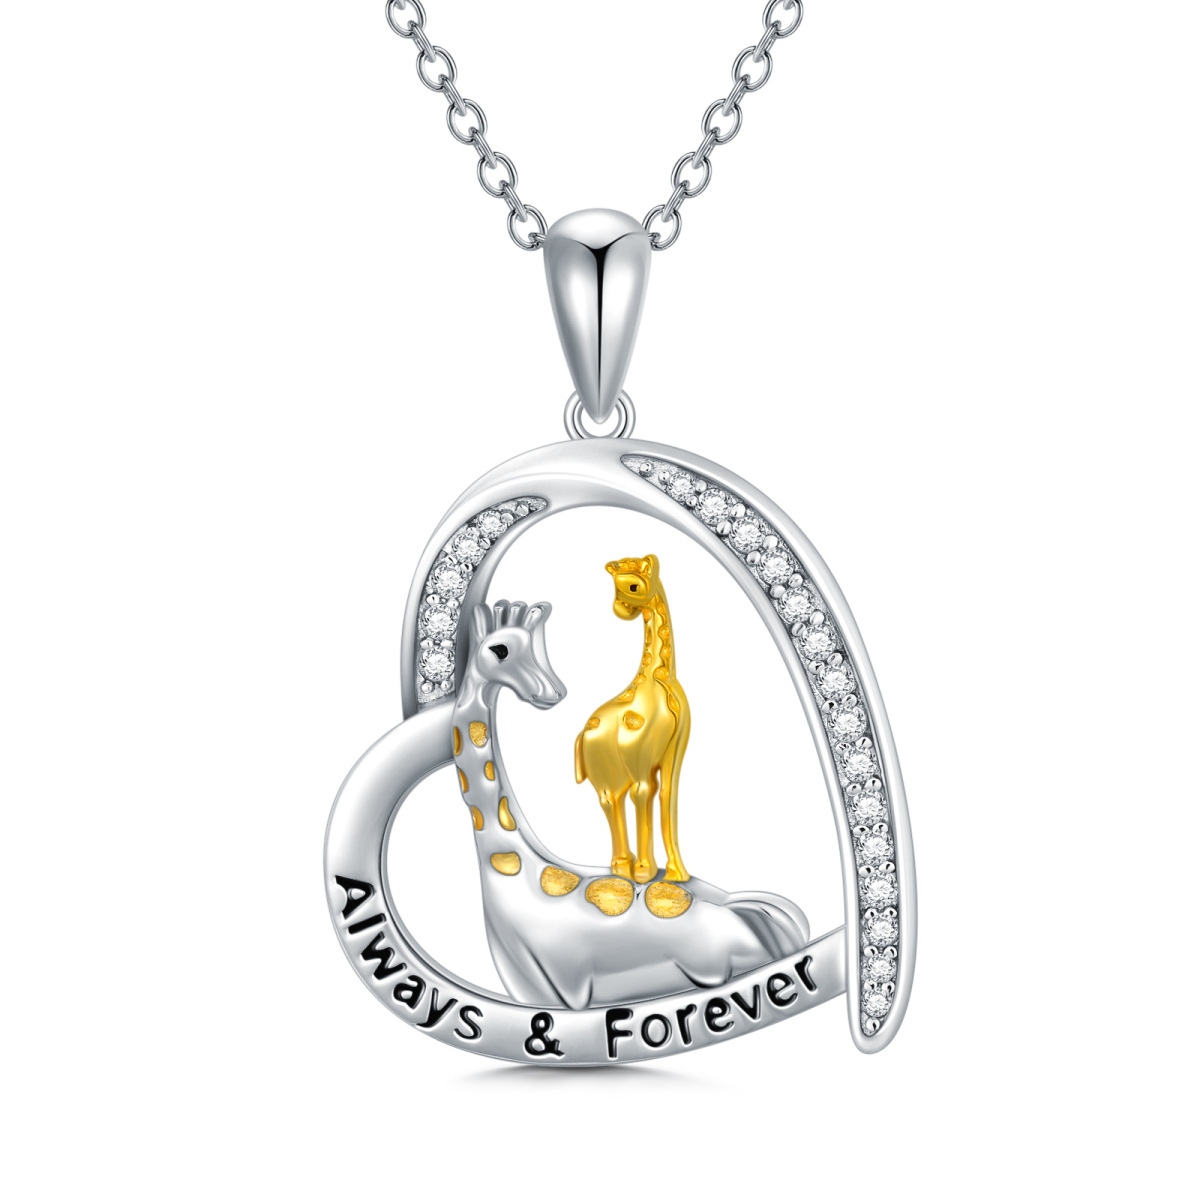 Sterling Silver Circular Shaped Cubic Zirconia Giraffe & Heart Pendant Necklace with Engraved Word-1